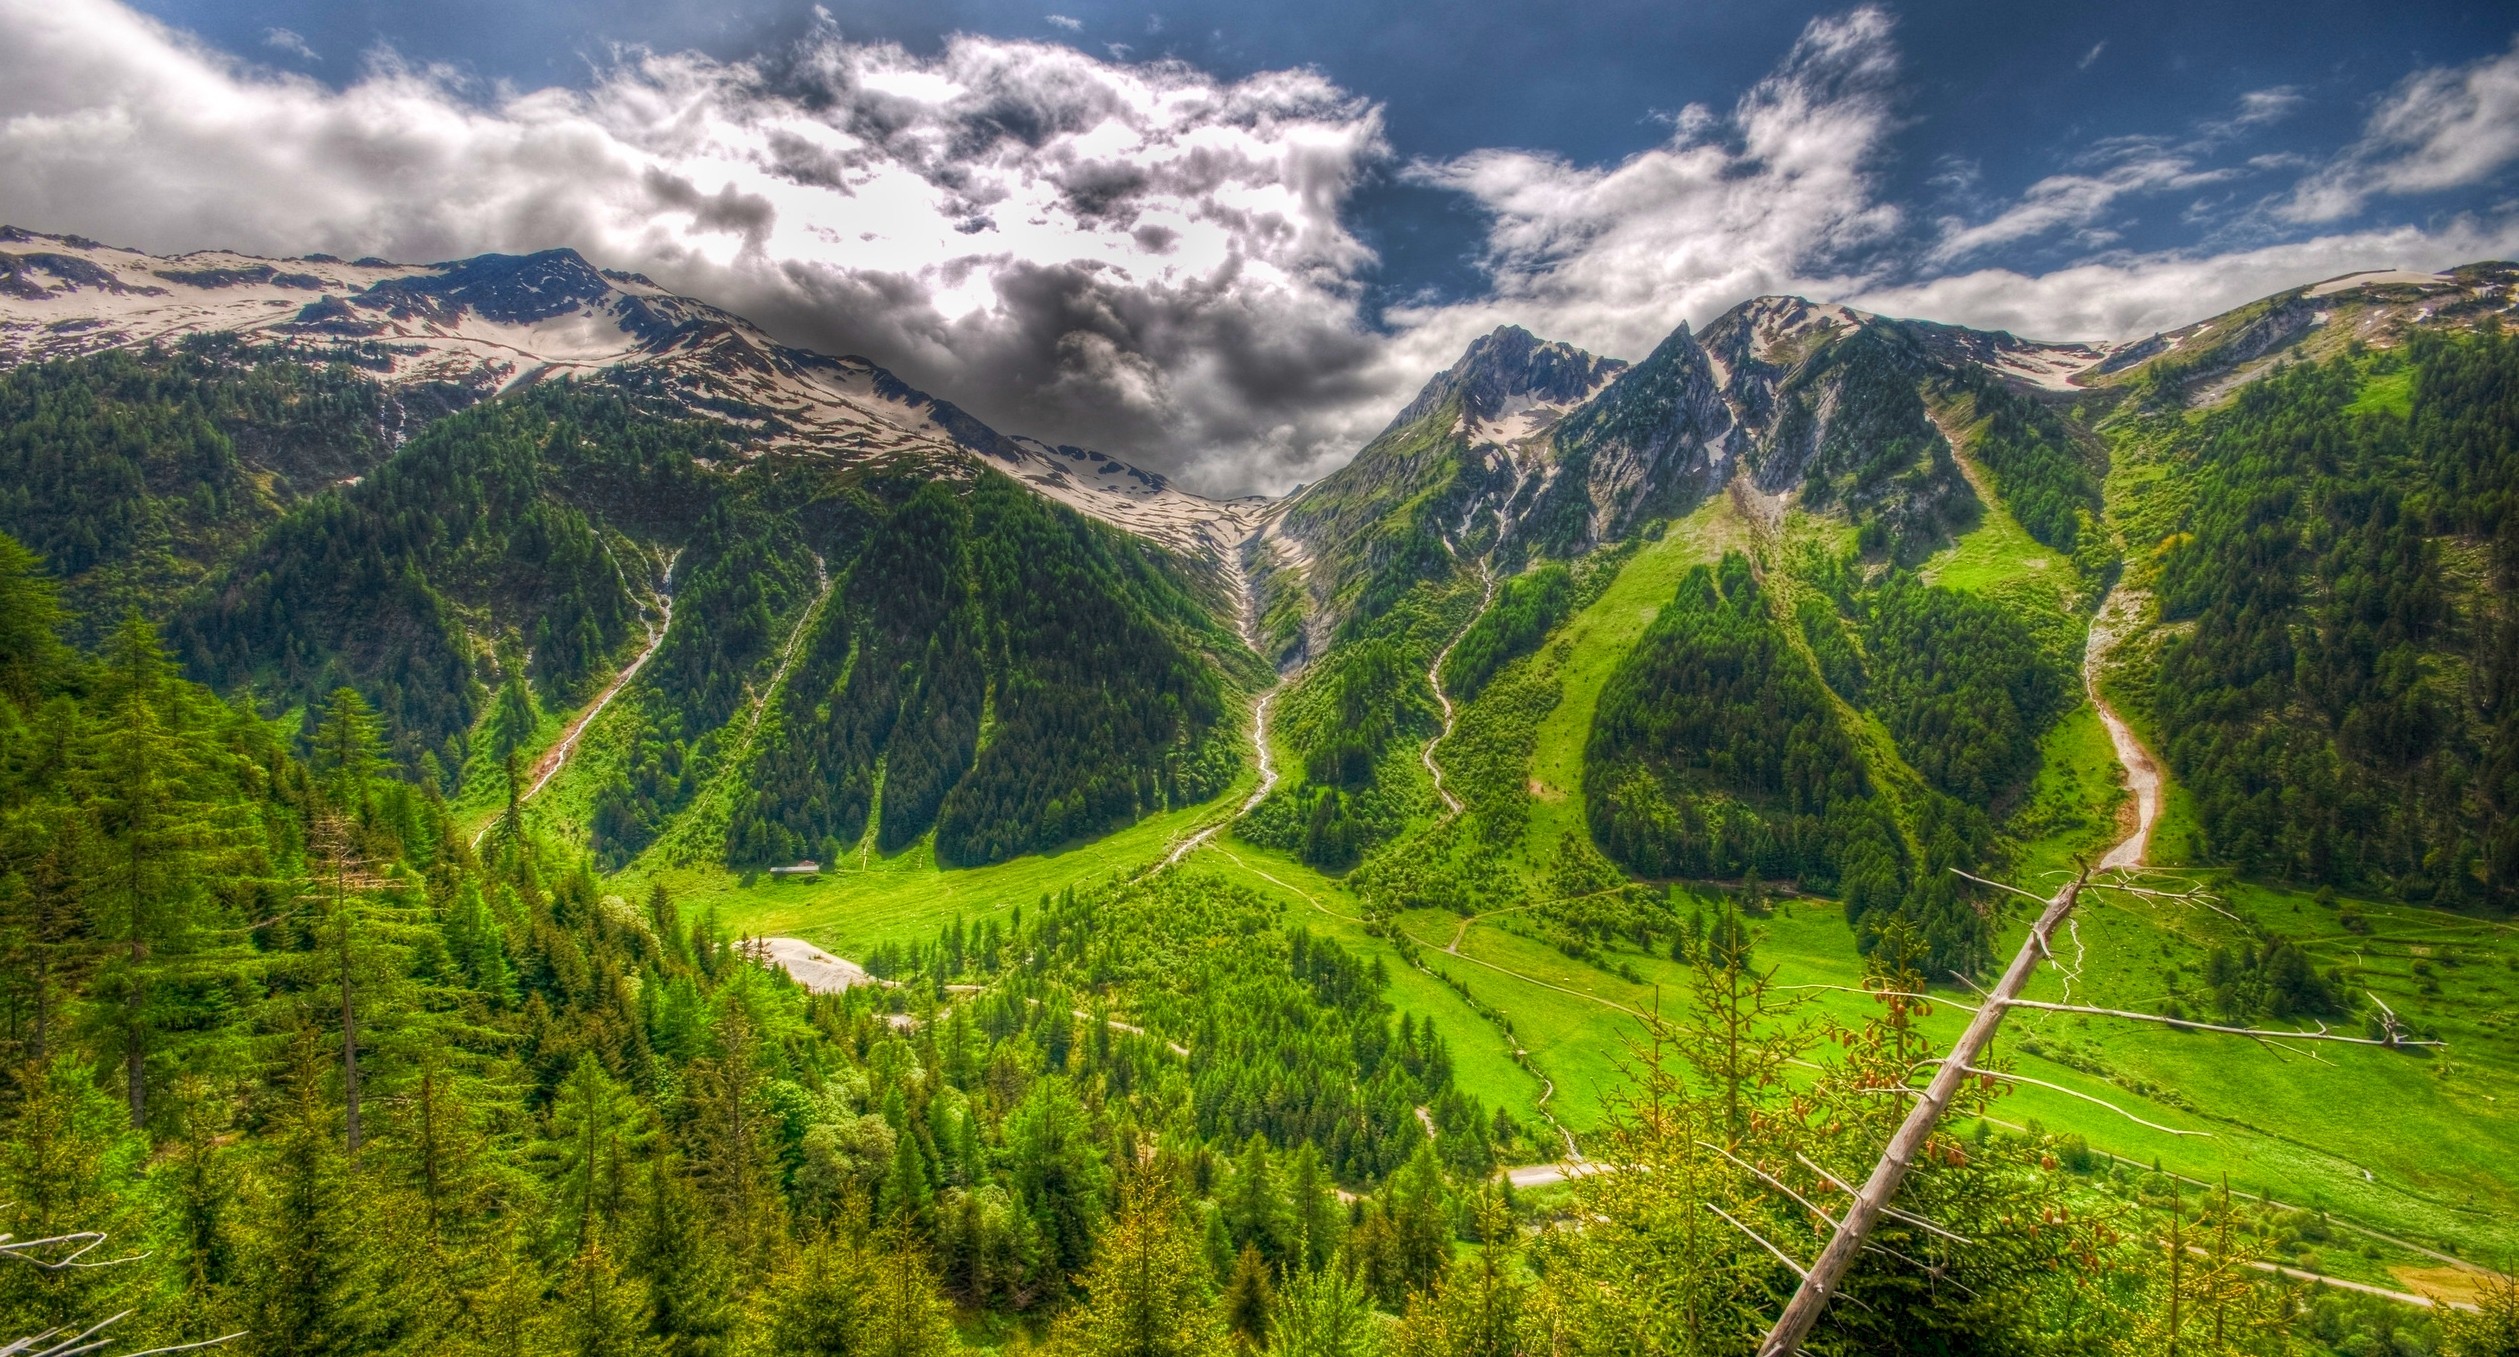 General 2519x1357 nature landscape Switzerland valley summer mountains forest clouds grass panorama